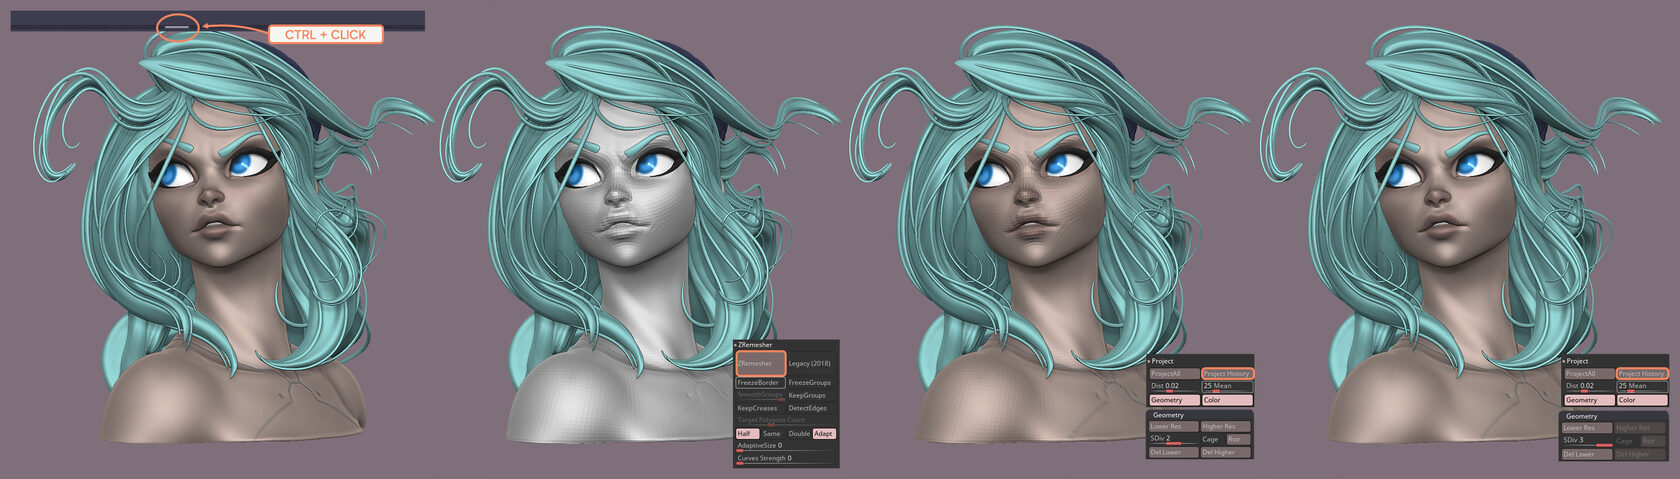 subdivide and project onto the higher resolution in zbrush